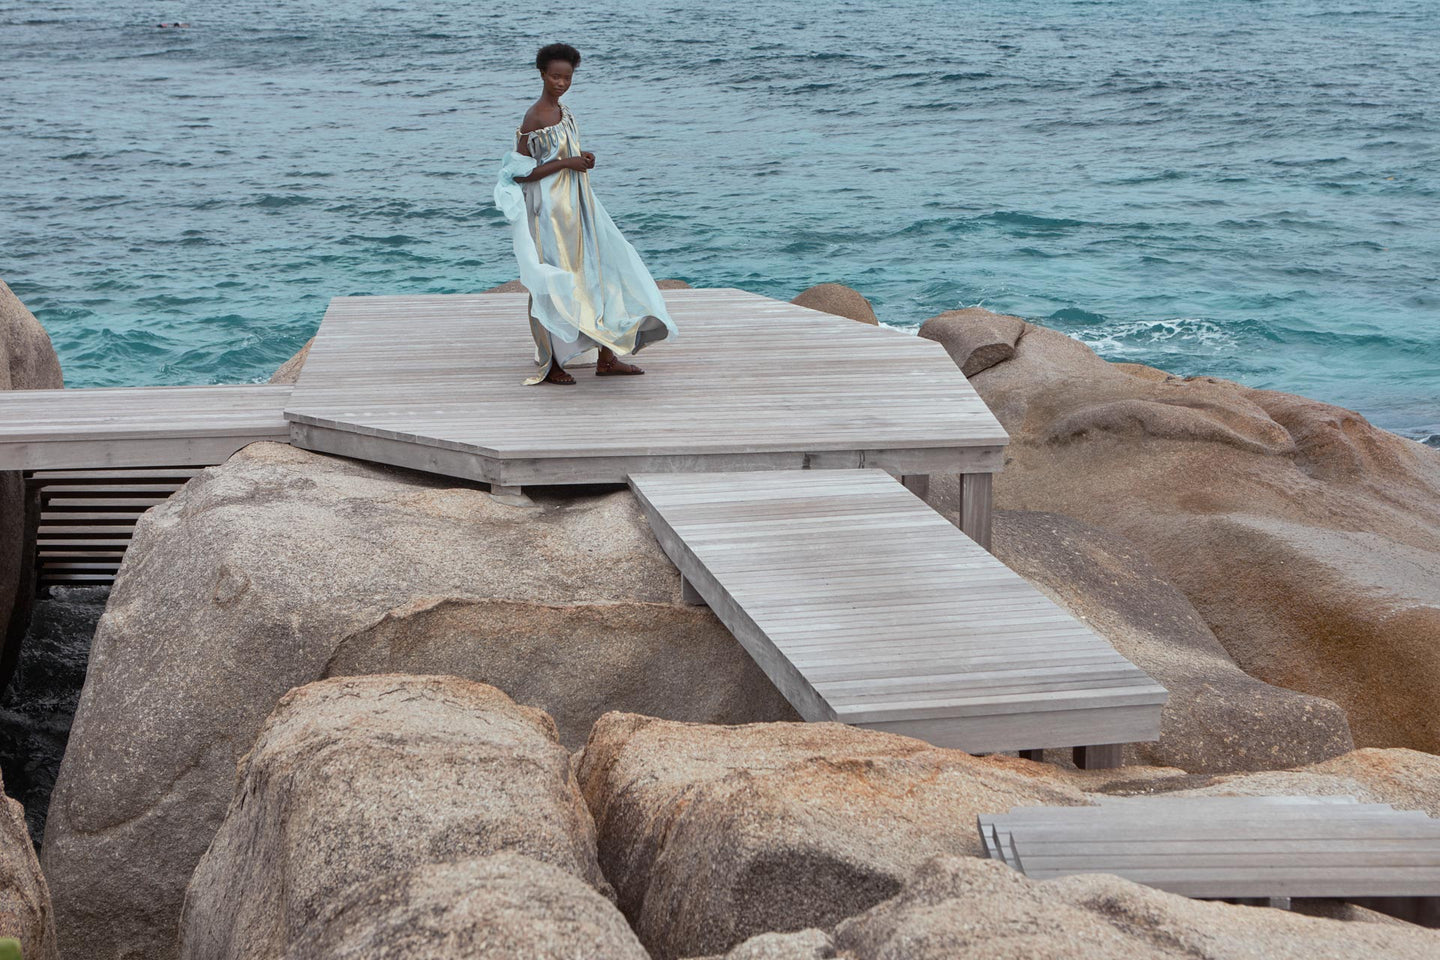 CARL KAPP SS2020 collection in Seychelles Six Senses Zil Pasyon | Indian Ocean Dress, Paradise Trench